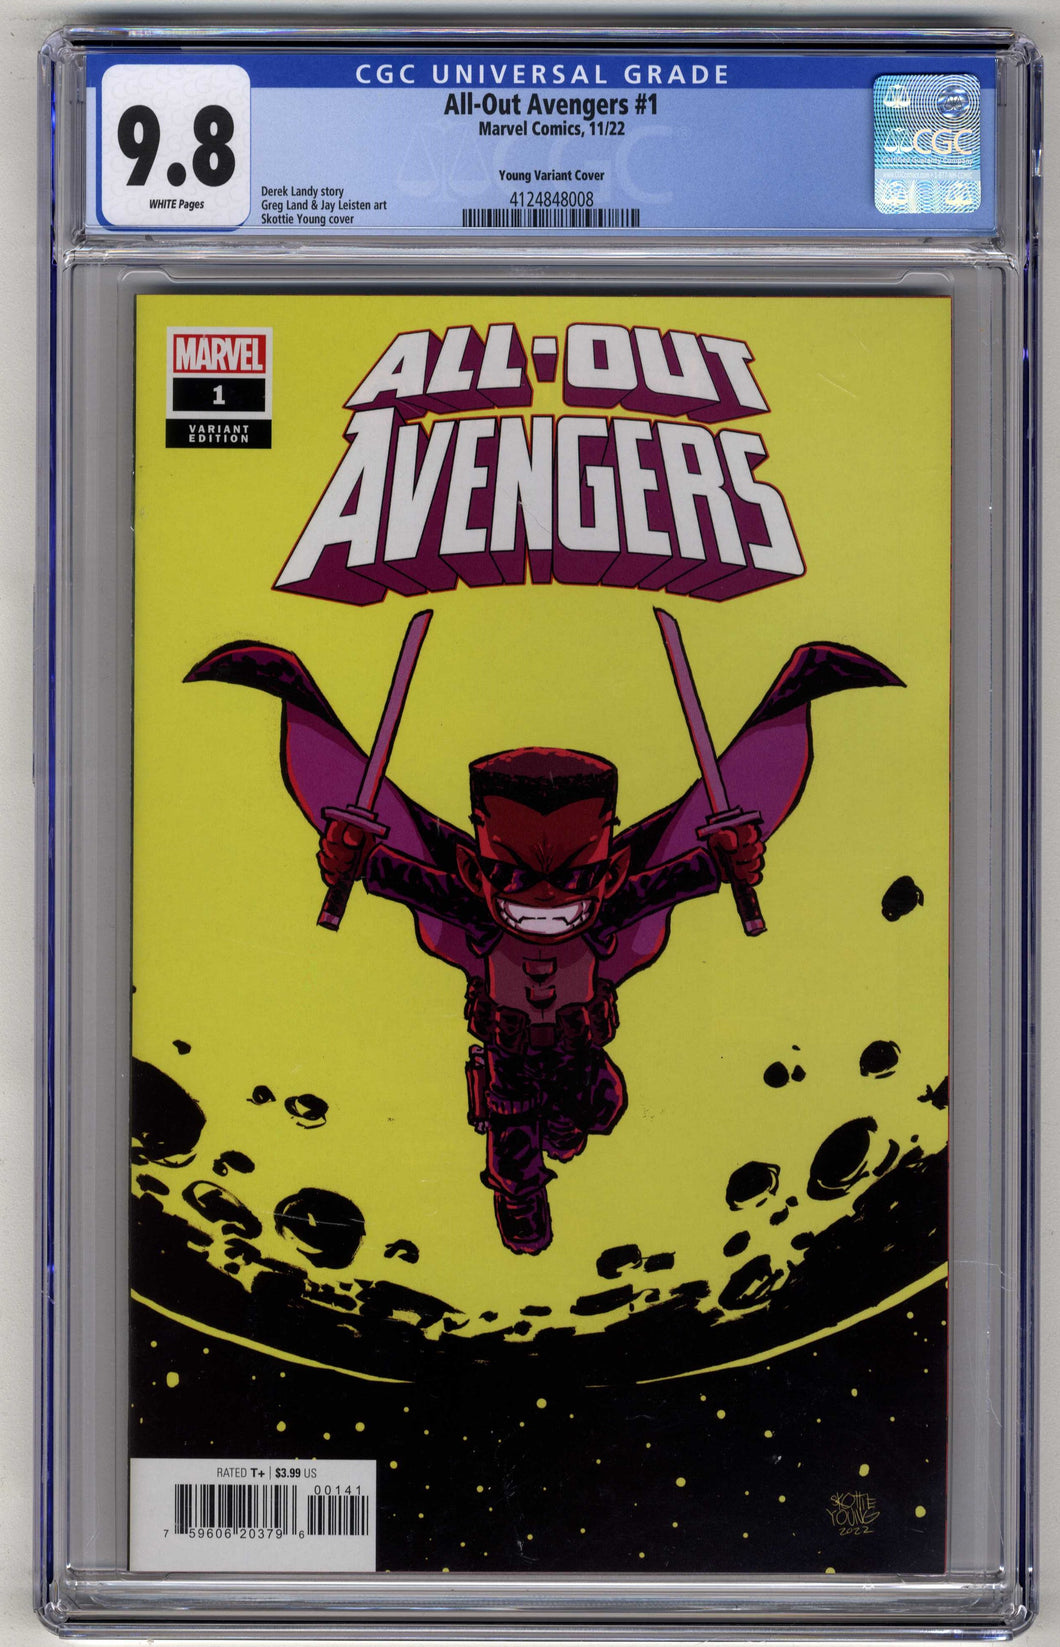 All-Out Avengers #1, Skottie Young CGC 9.8